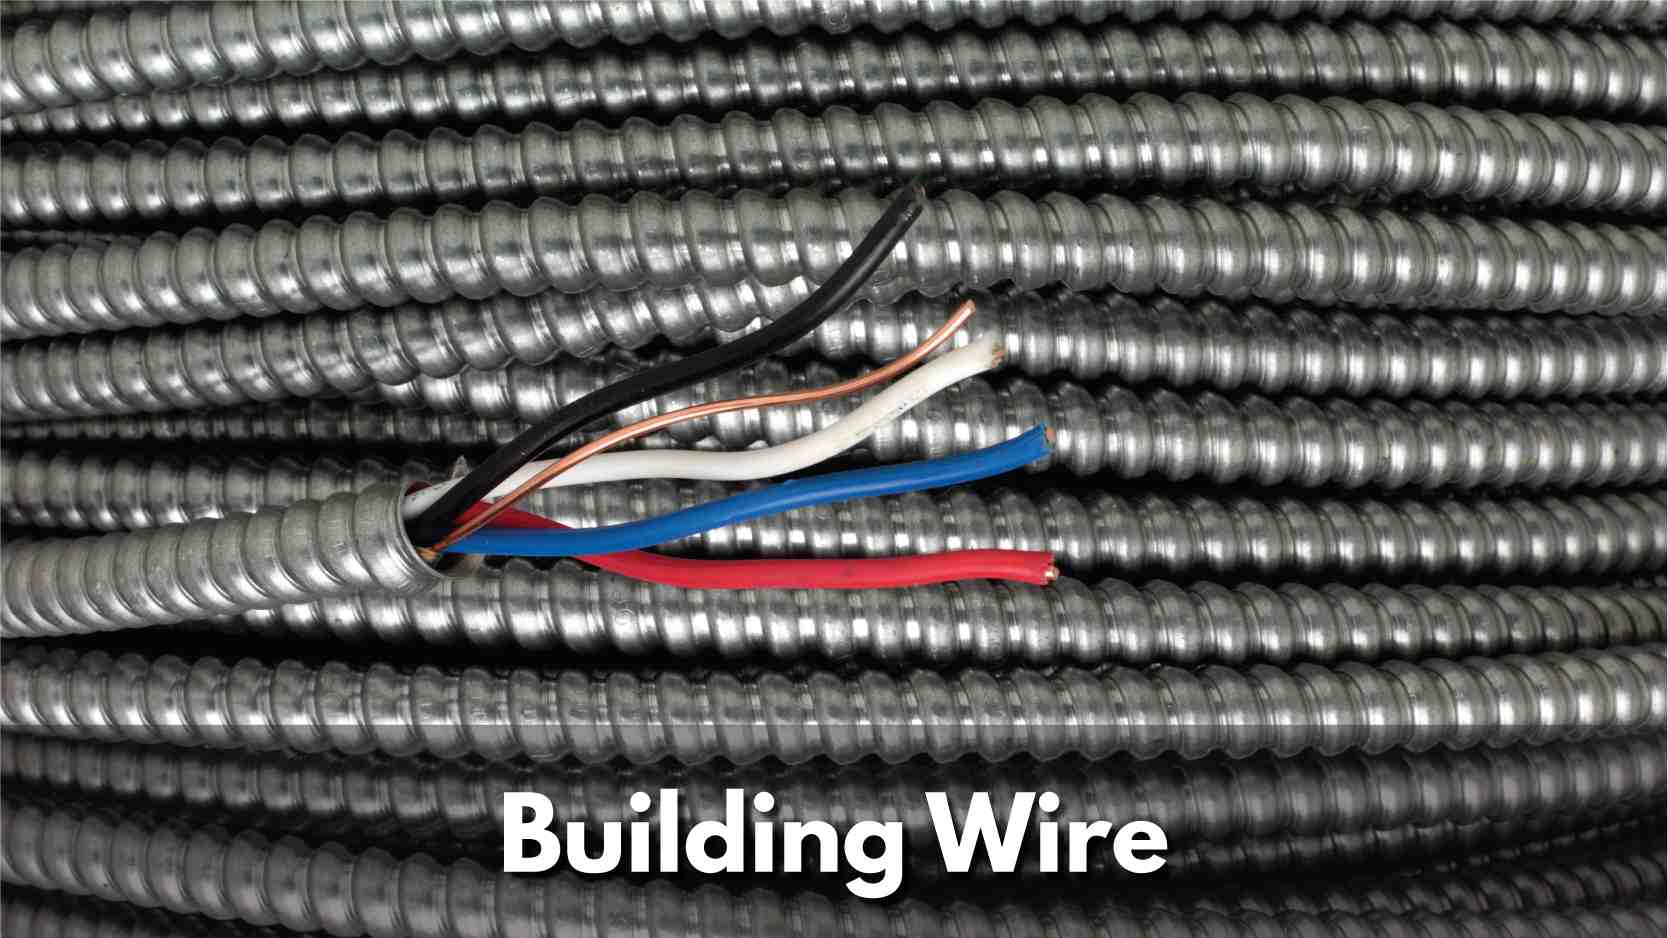 Texcan - View All Products - Building Wire